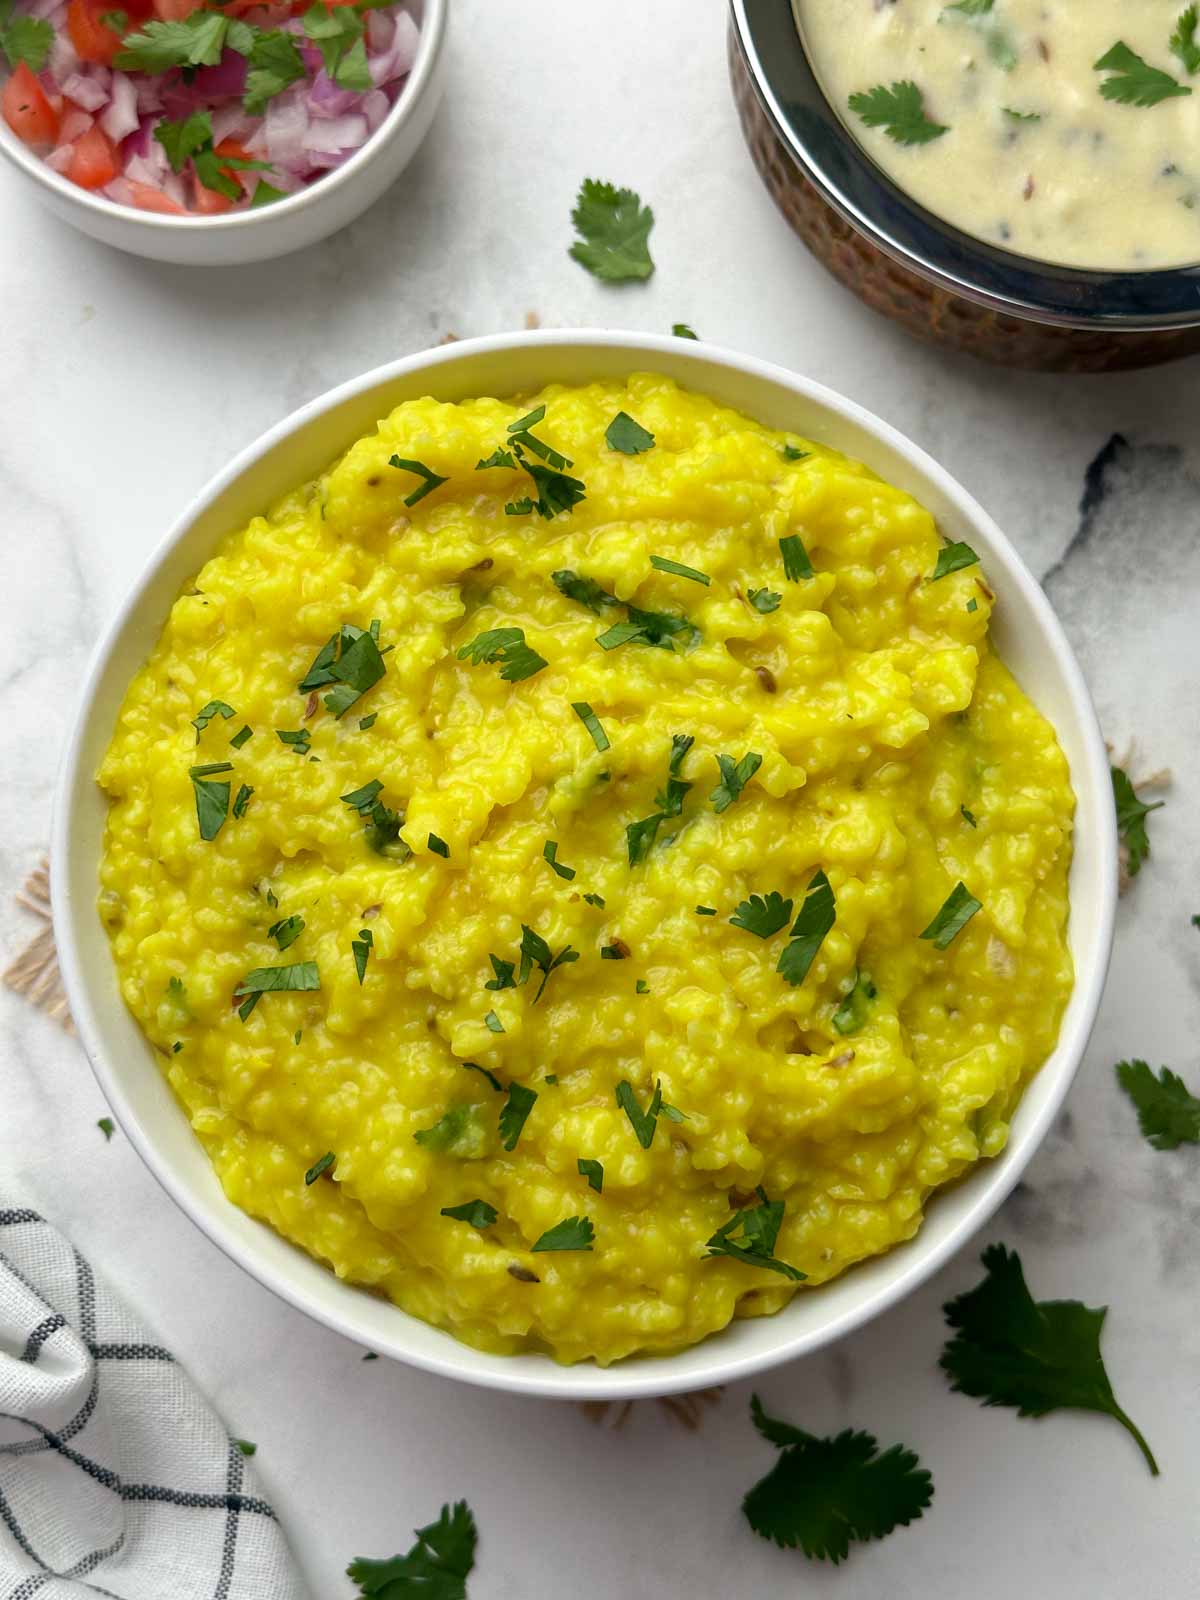 khichdi served in a bowl garnished with cilantro with kadhi on the side